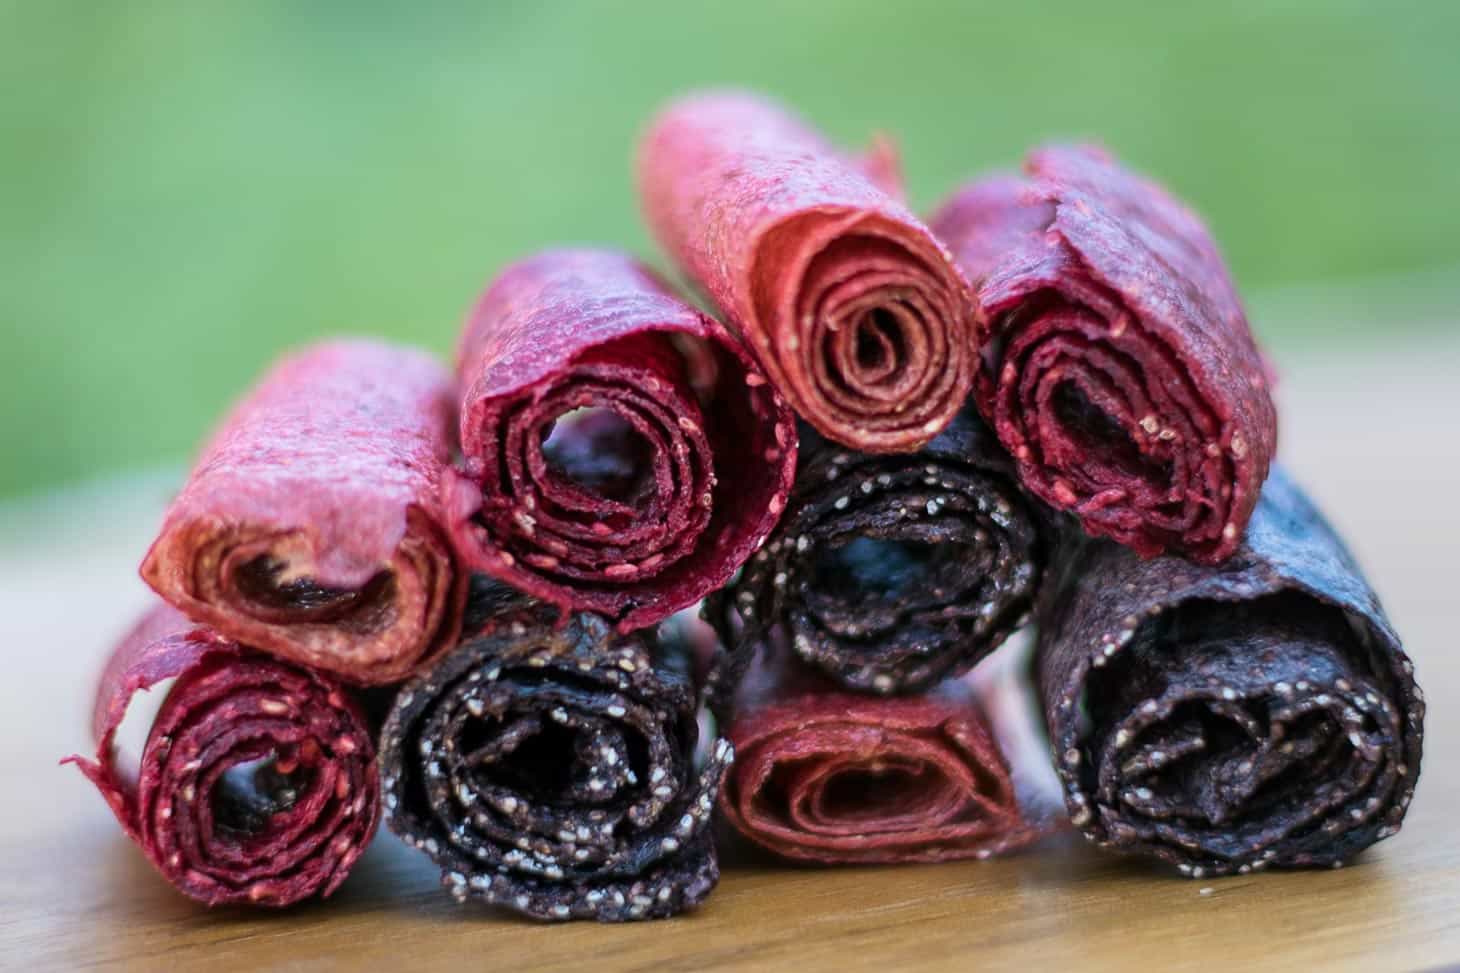 Tropical Fruit Leather Recipe (Fruit Roll Ups) - CPM